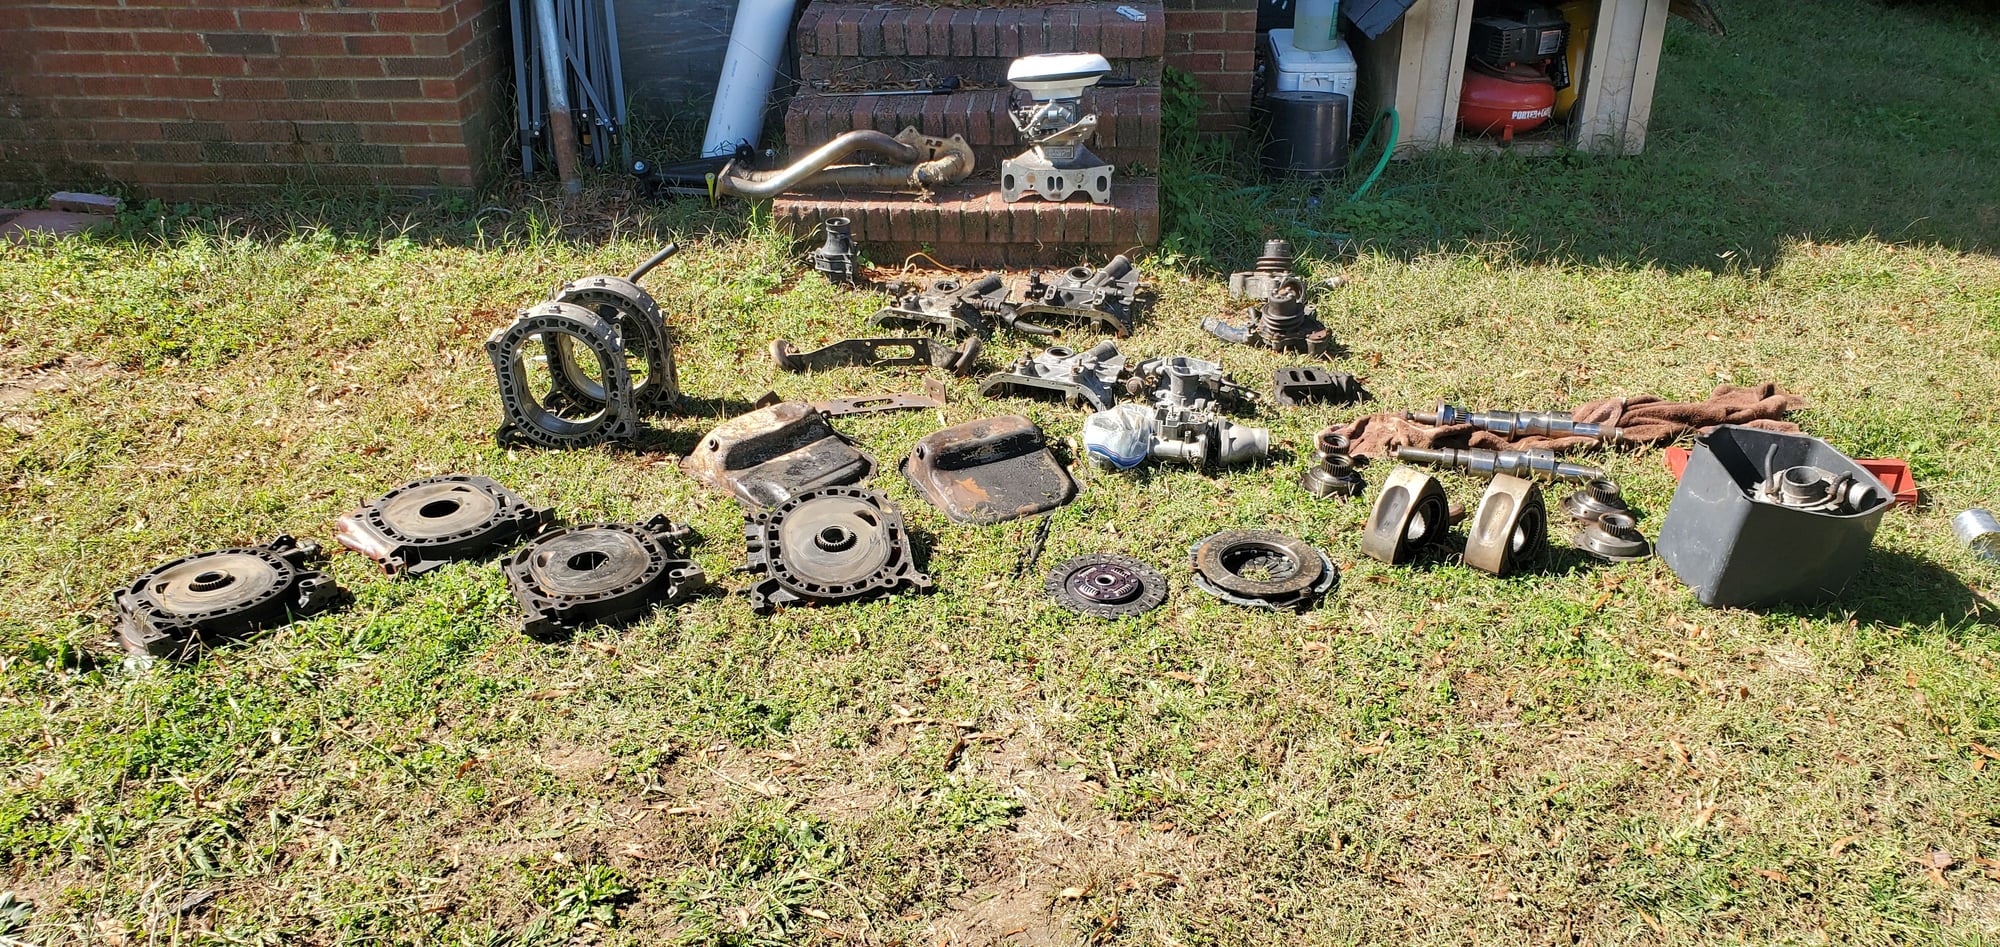 Engine - Internals - Going Ls sale I have a lot of rotary parts - Used - 1979 to 1985 Mazda RX-7 - Cherryville, NC 28021, United States